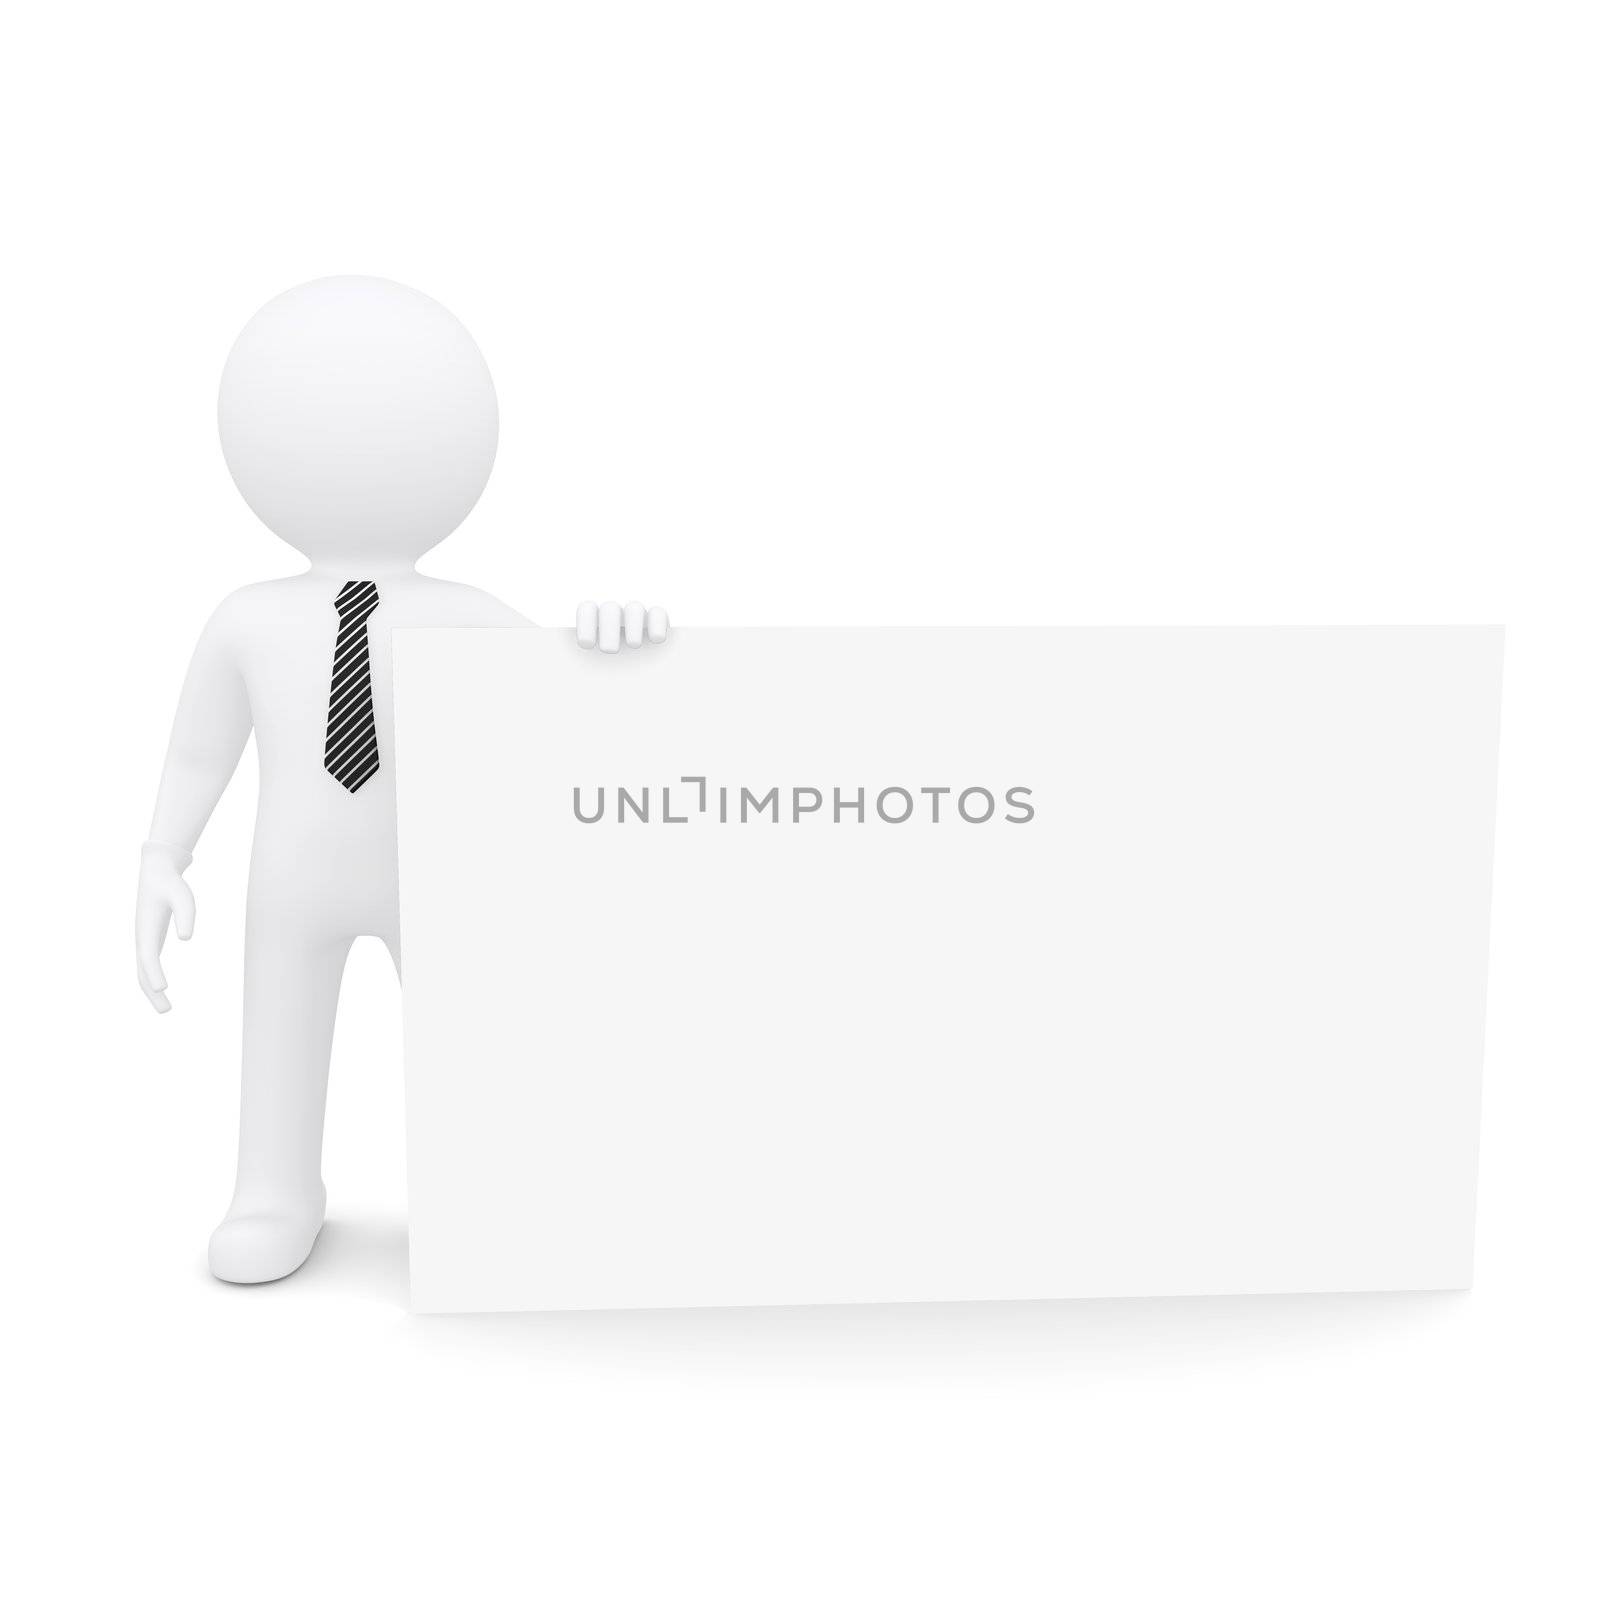 The white man holding a large white card. Isolated on white background